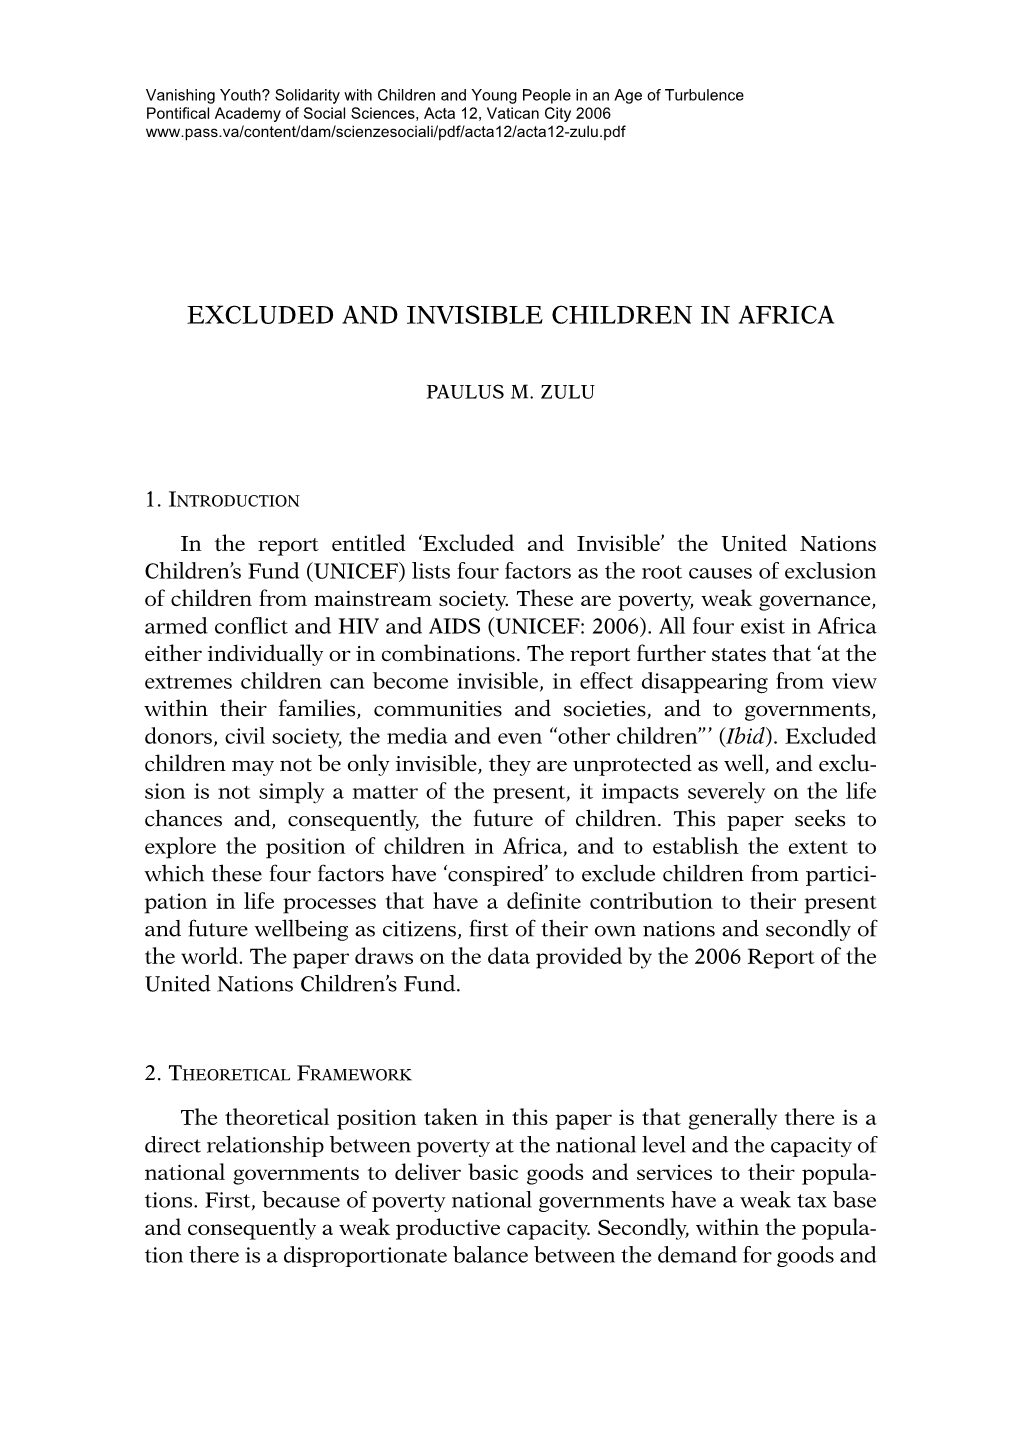 Excluded and Invisible Children in Africa